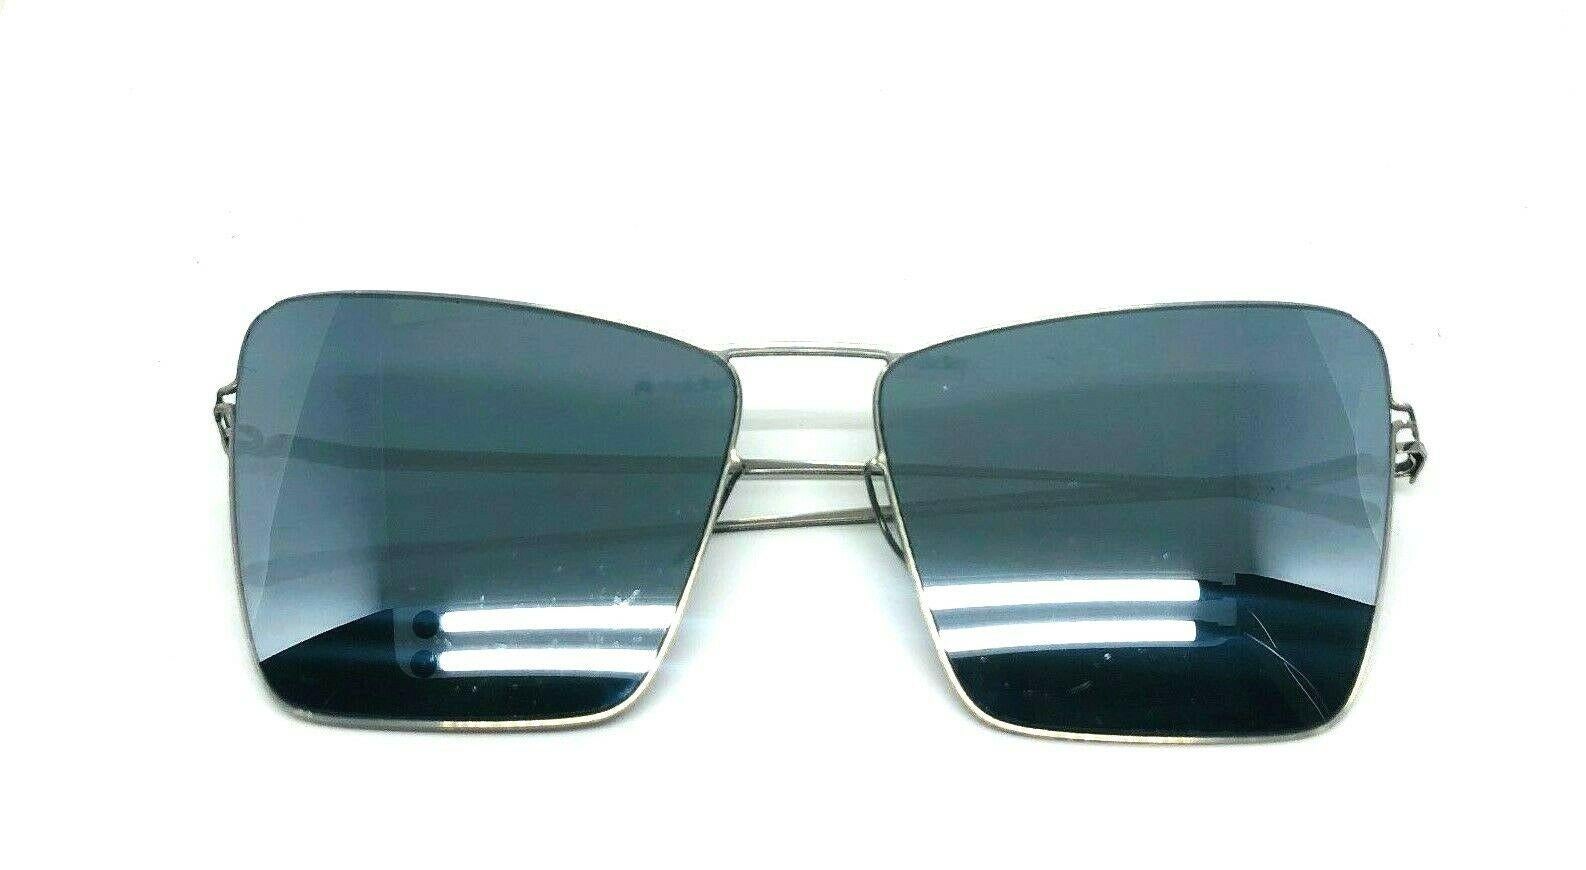 MYKITA Damir Doma Maison Margiela Square Mirror Sunglasses

Color: Black

Measurements:  5.25”W x 2”L

Details: Signed by MYKITA + Maison Margiela, stamped MMESSE014, COLE1, Size 140, 59 16

Comes with the original case.

Made in Germany.